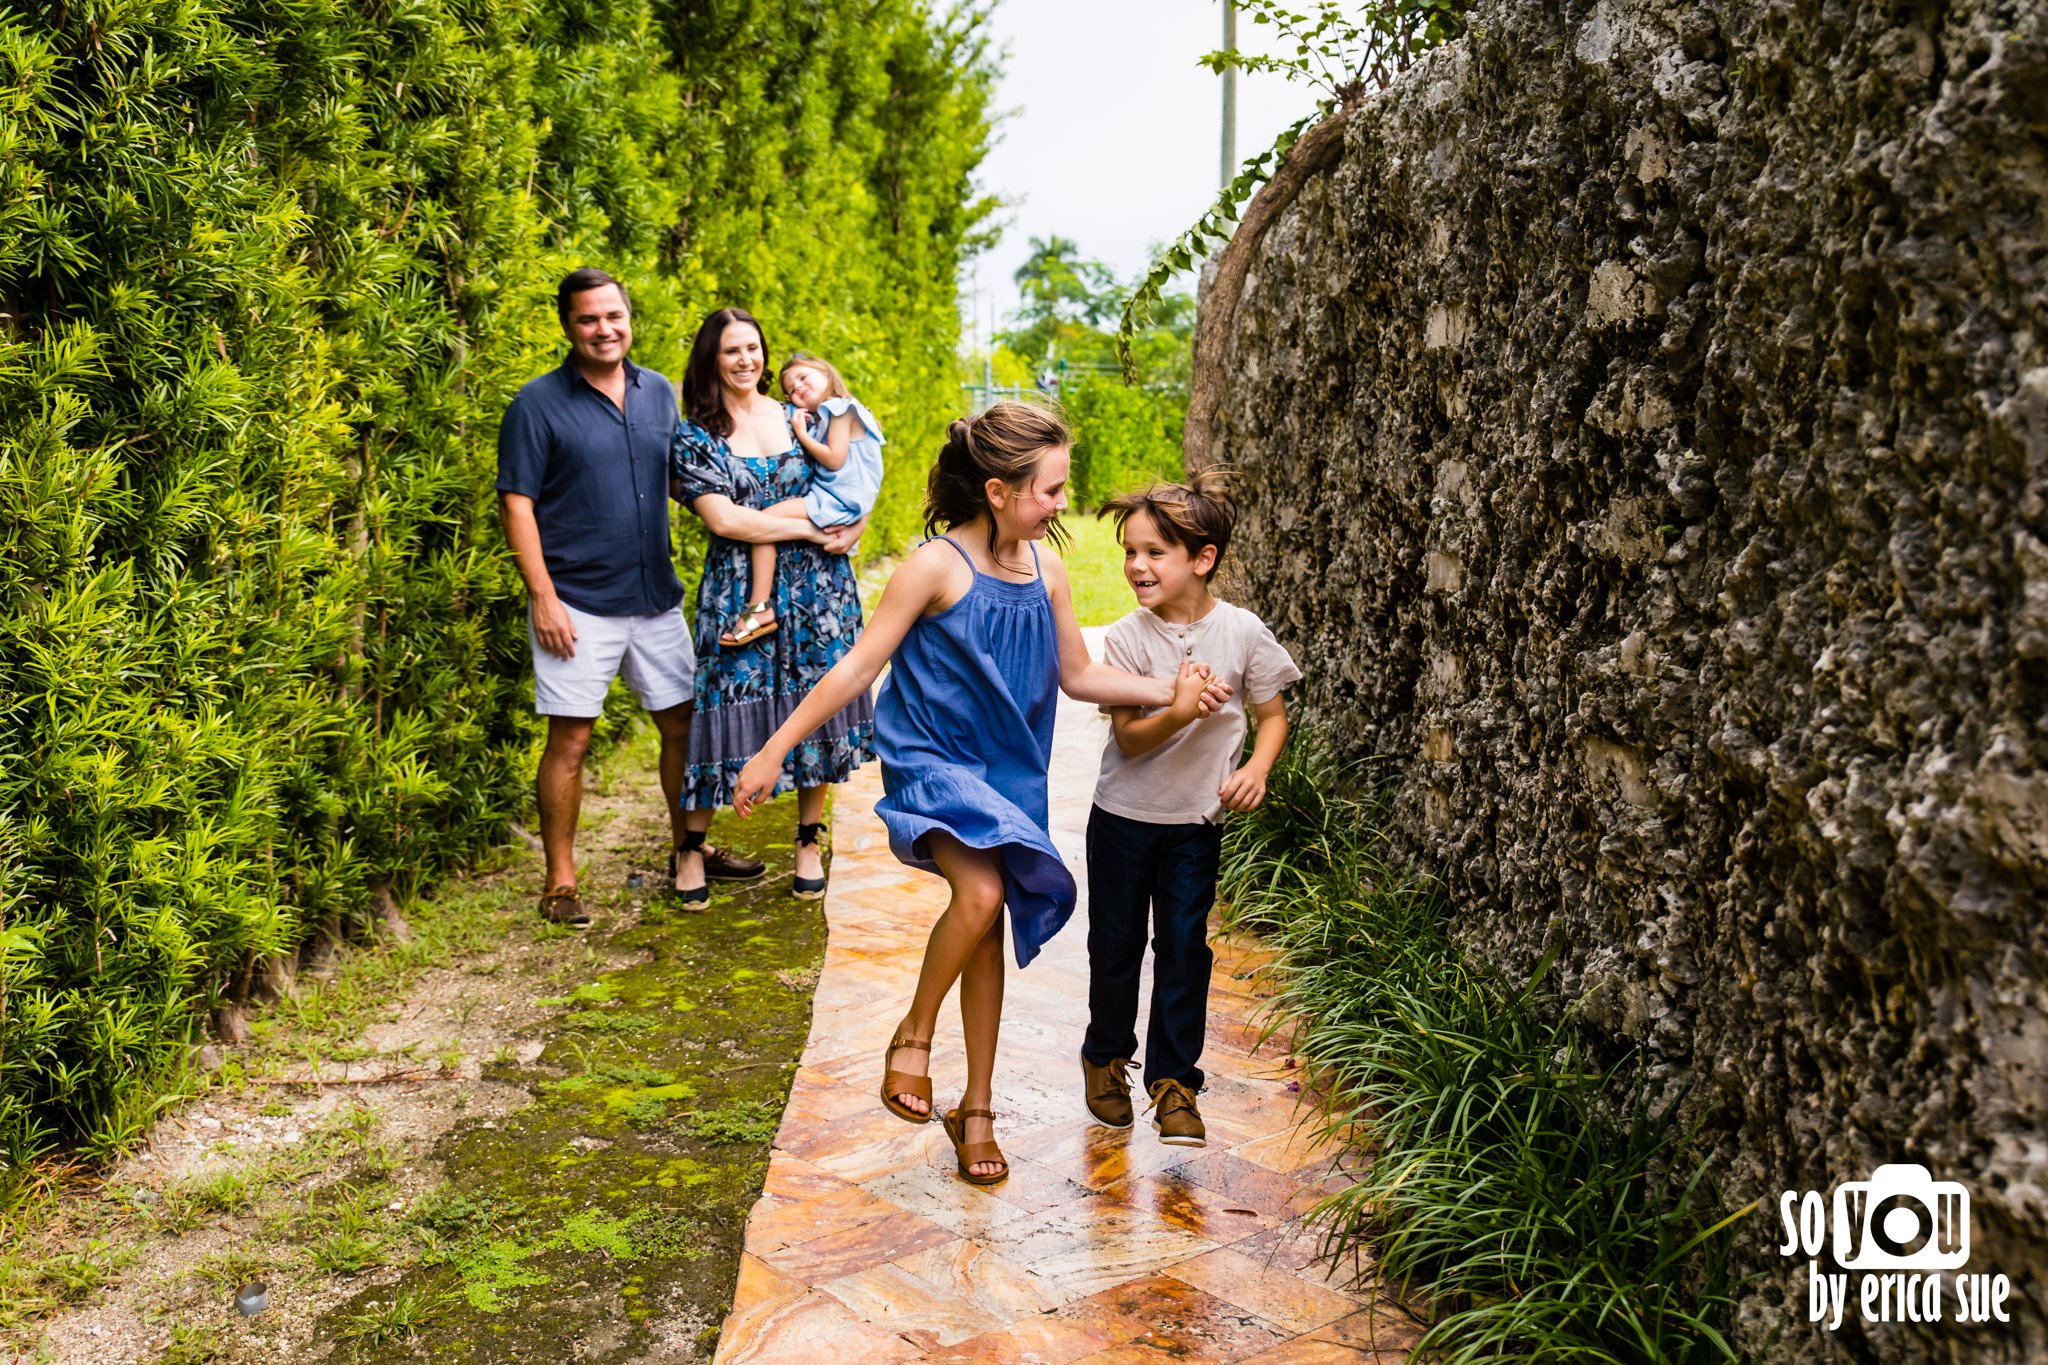 15-lifestyle-family-photographer-coral-castle-miami-fl-so-you-by-erica-sue-ES2_9235.jpg